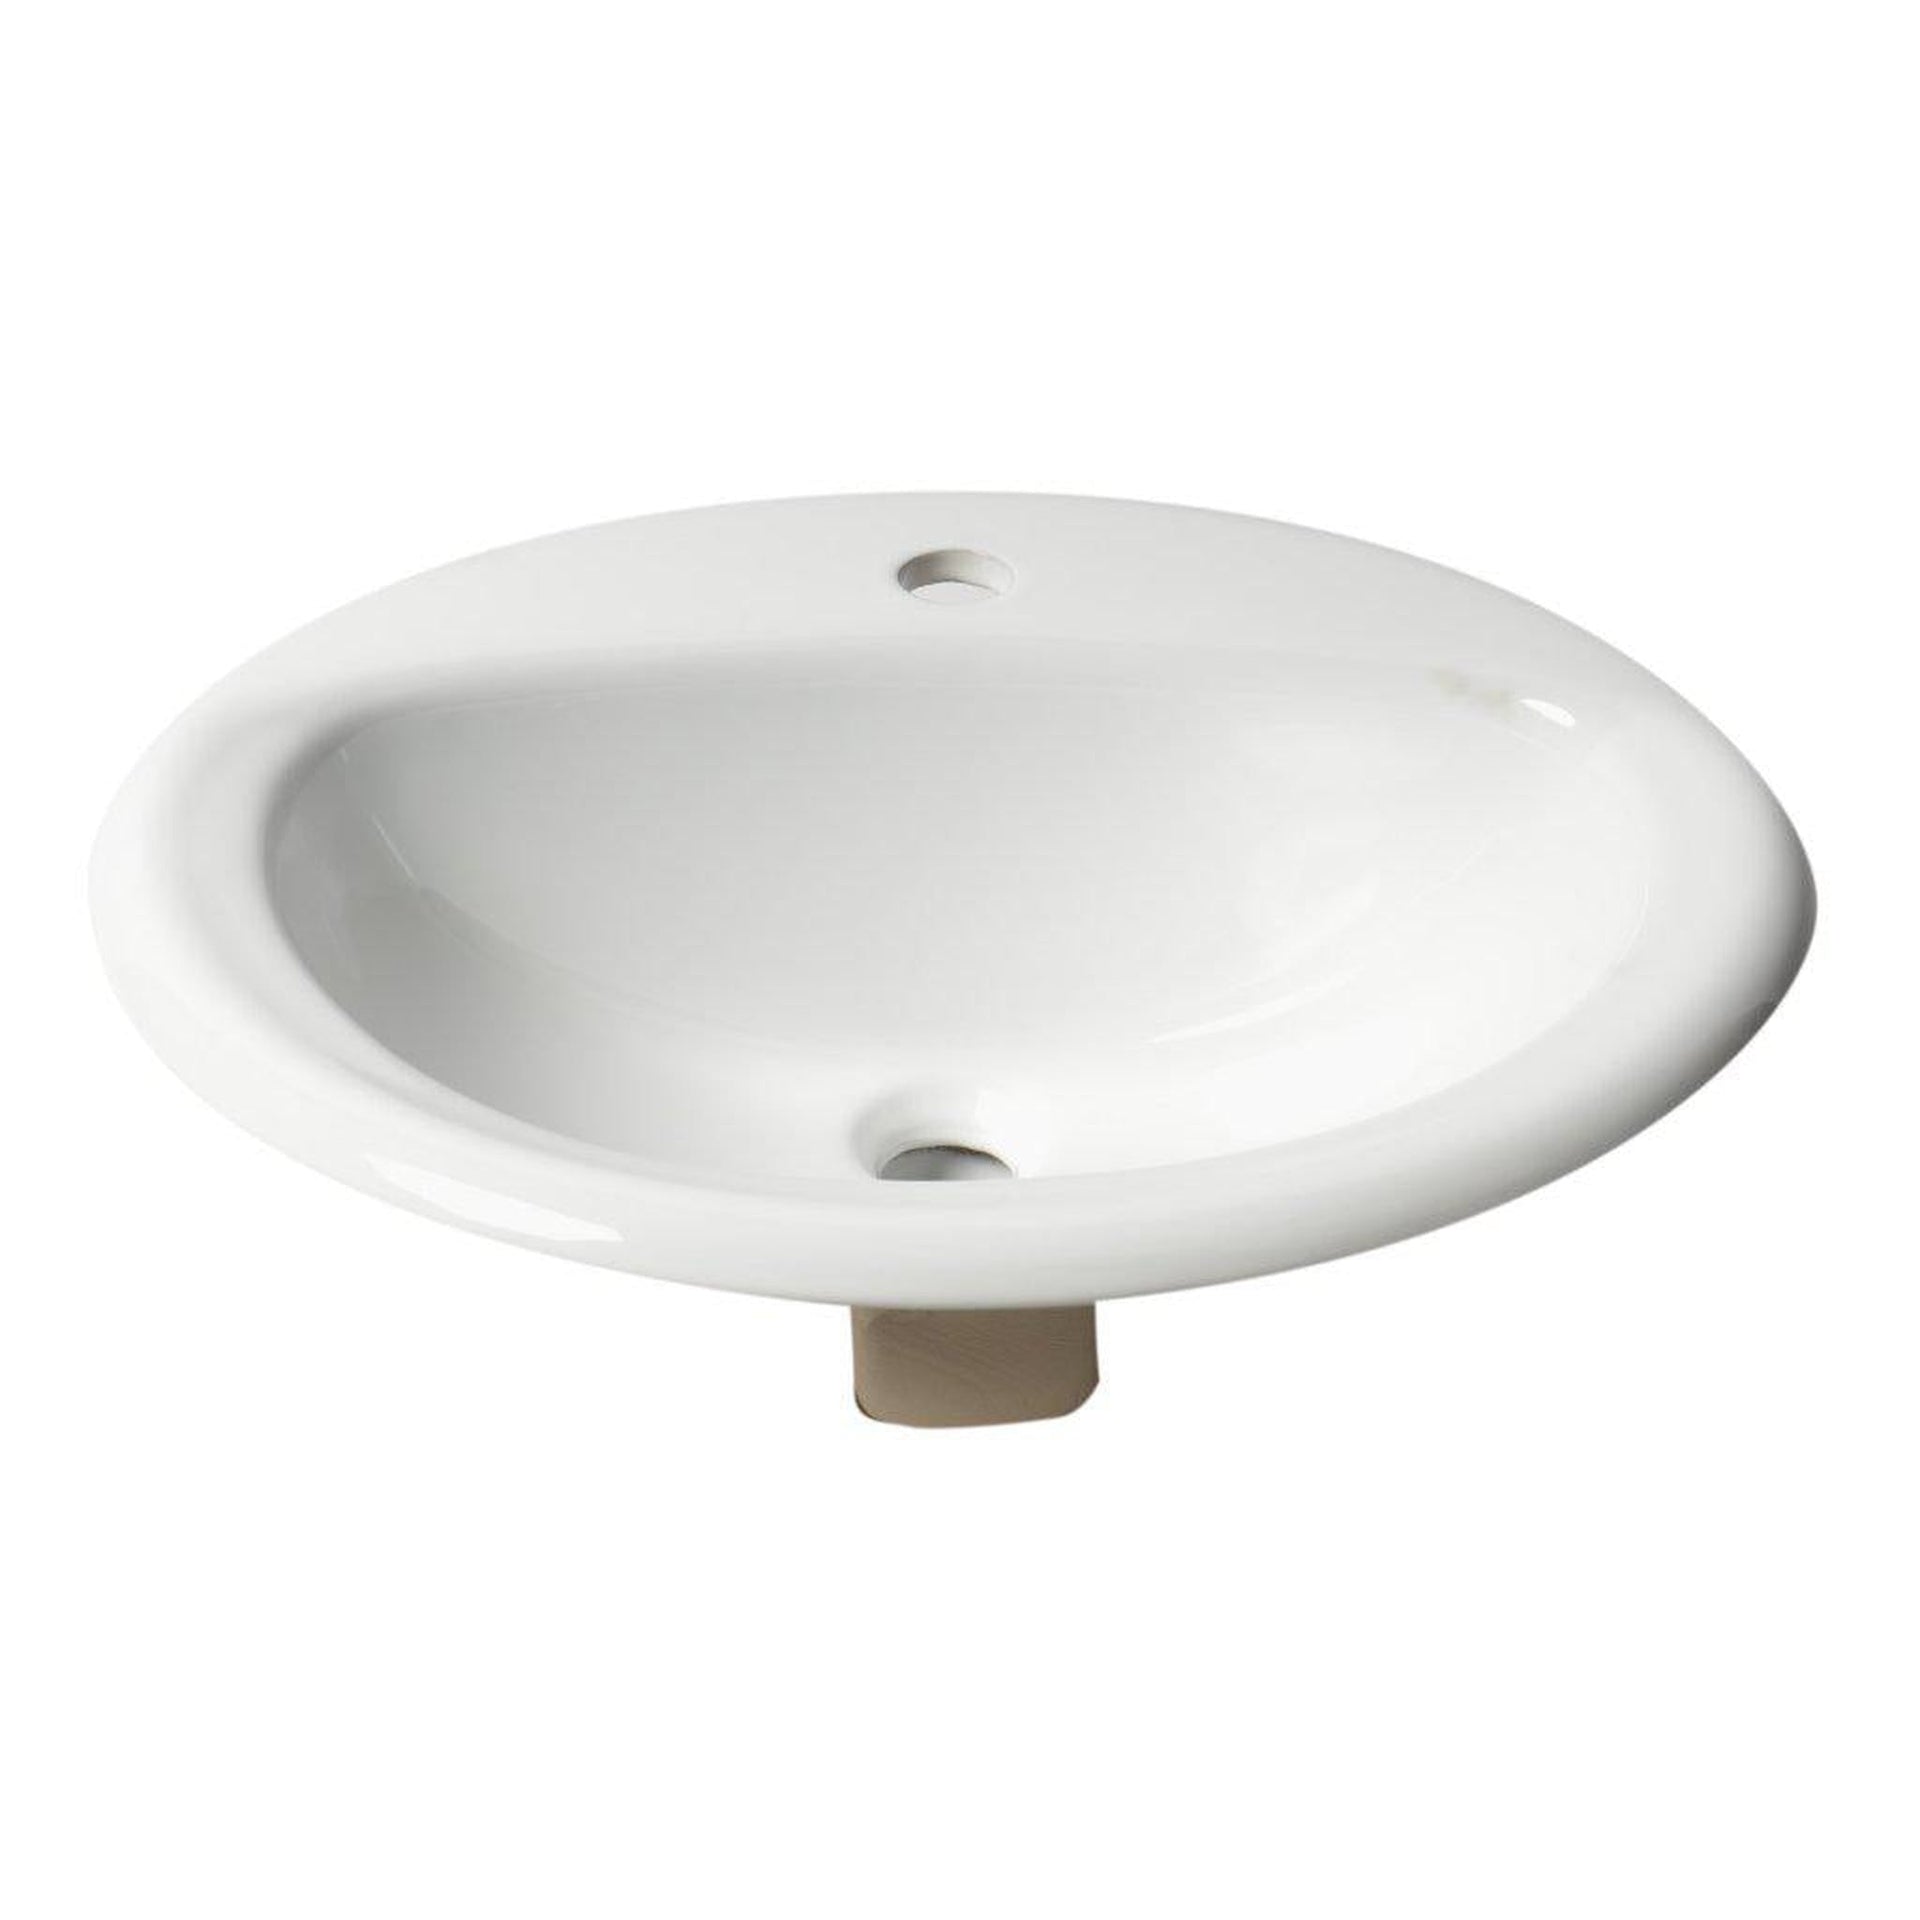 https://usbathstore.com/cdn/shop/products/ALFI-Brand-ABC802-21-White-Glossy-Drop-In-Oval-Ceramic-Bathroom-Sink-With-Single-Faucet-Hole-and-Overflow.jpg?v=1665699549&width=1920